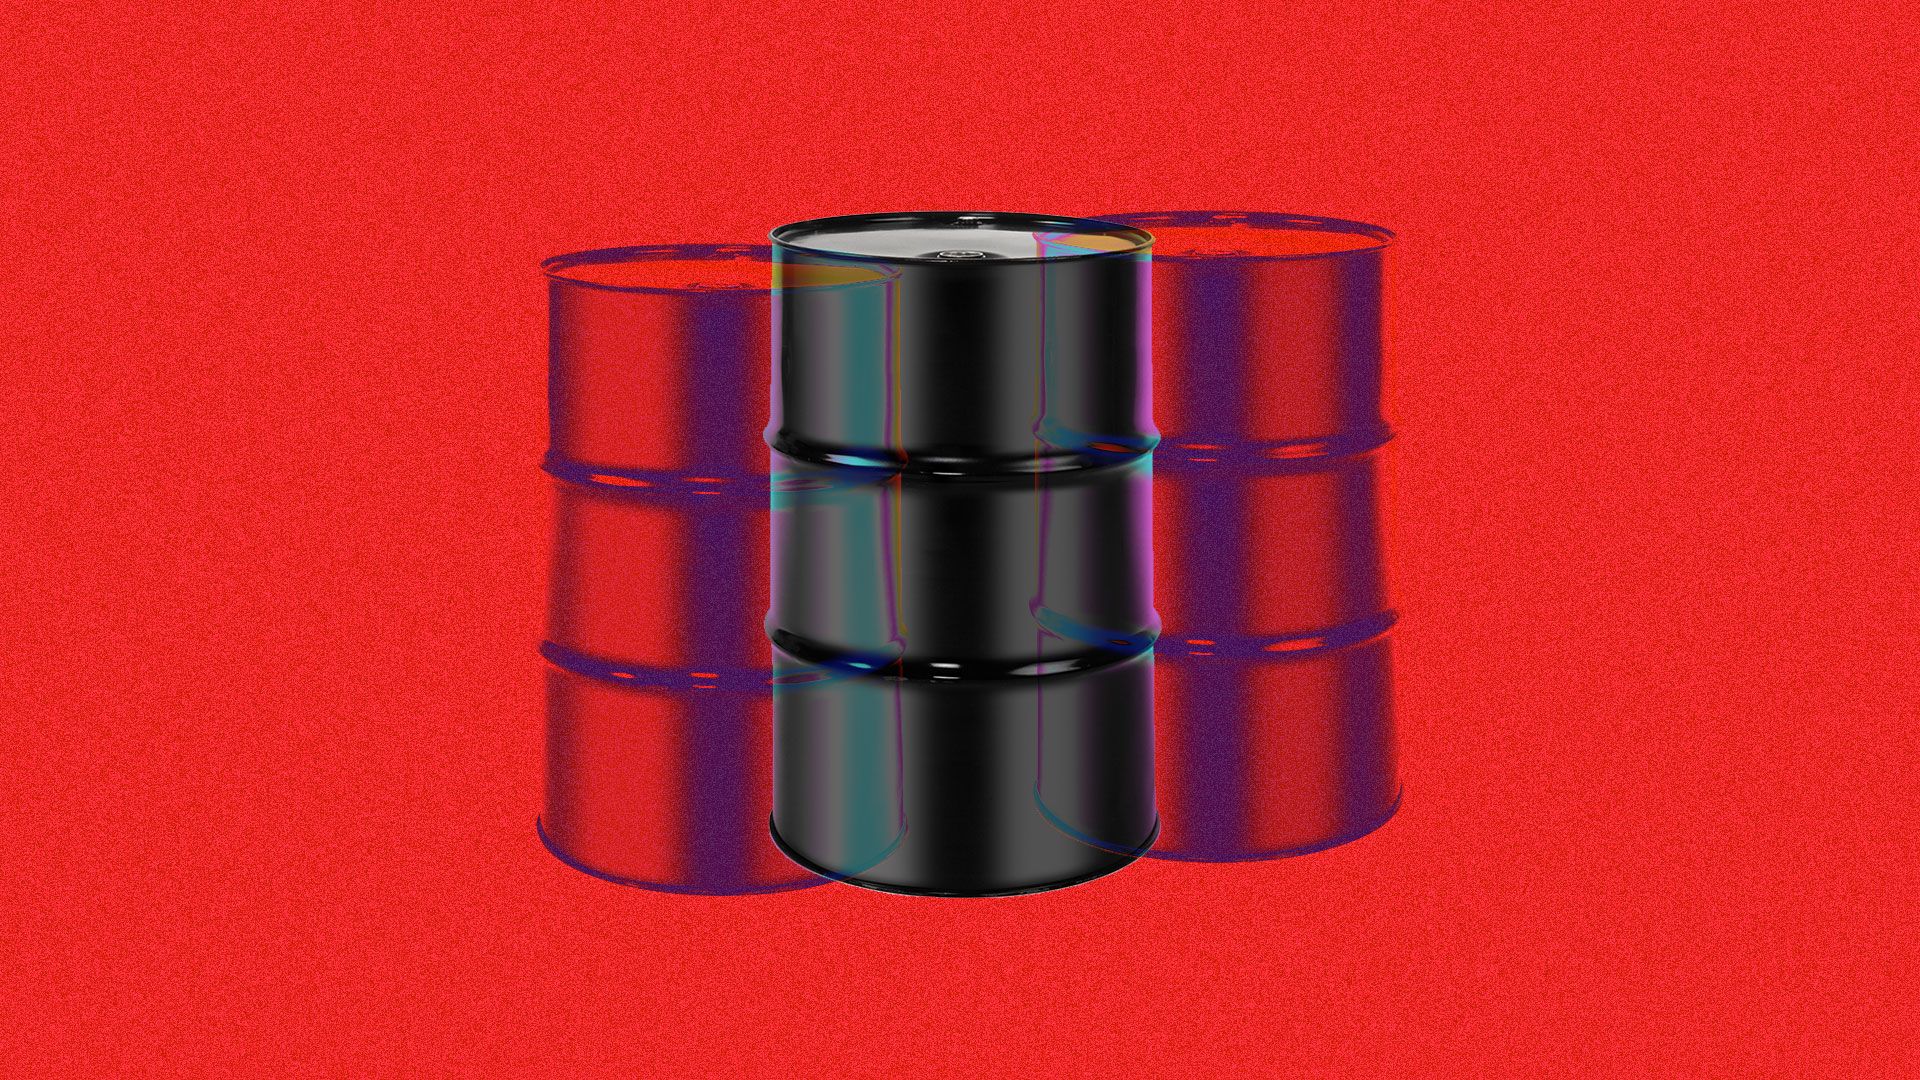 Illustration of an oil barrel seen double in psychedelic colors. 